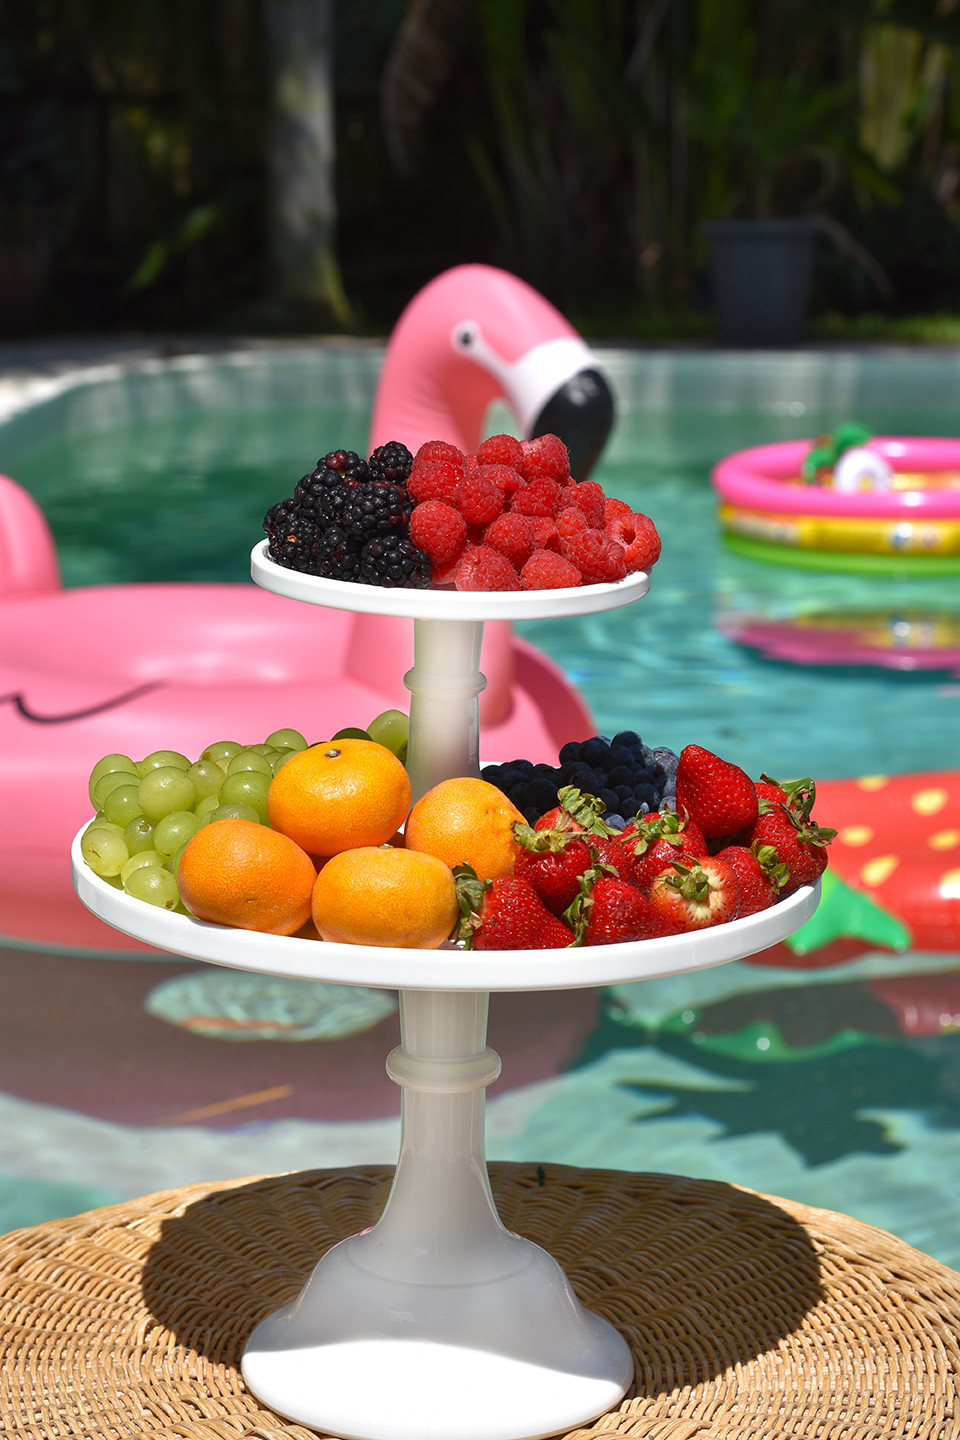 Pool Party Food Ideas For Adults
 Pool Party Ideas for Adults • Happy Family Blog